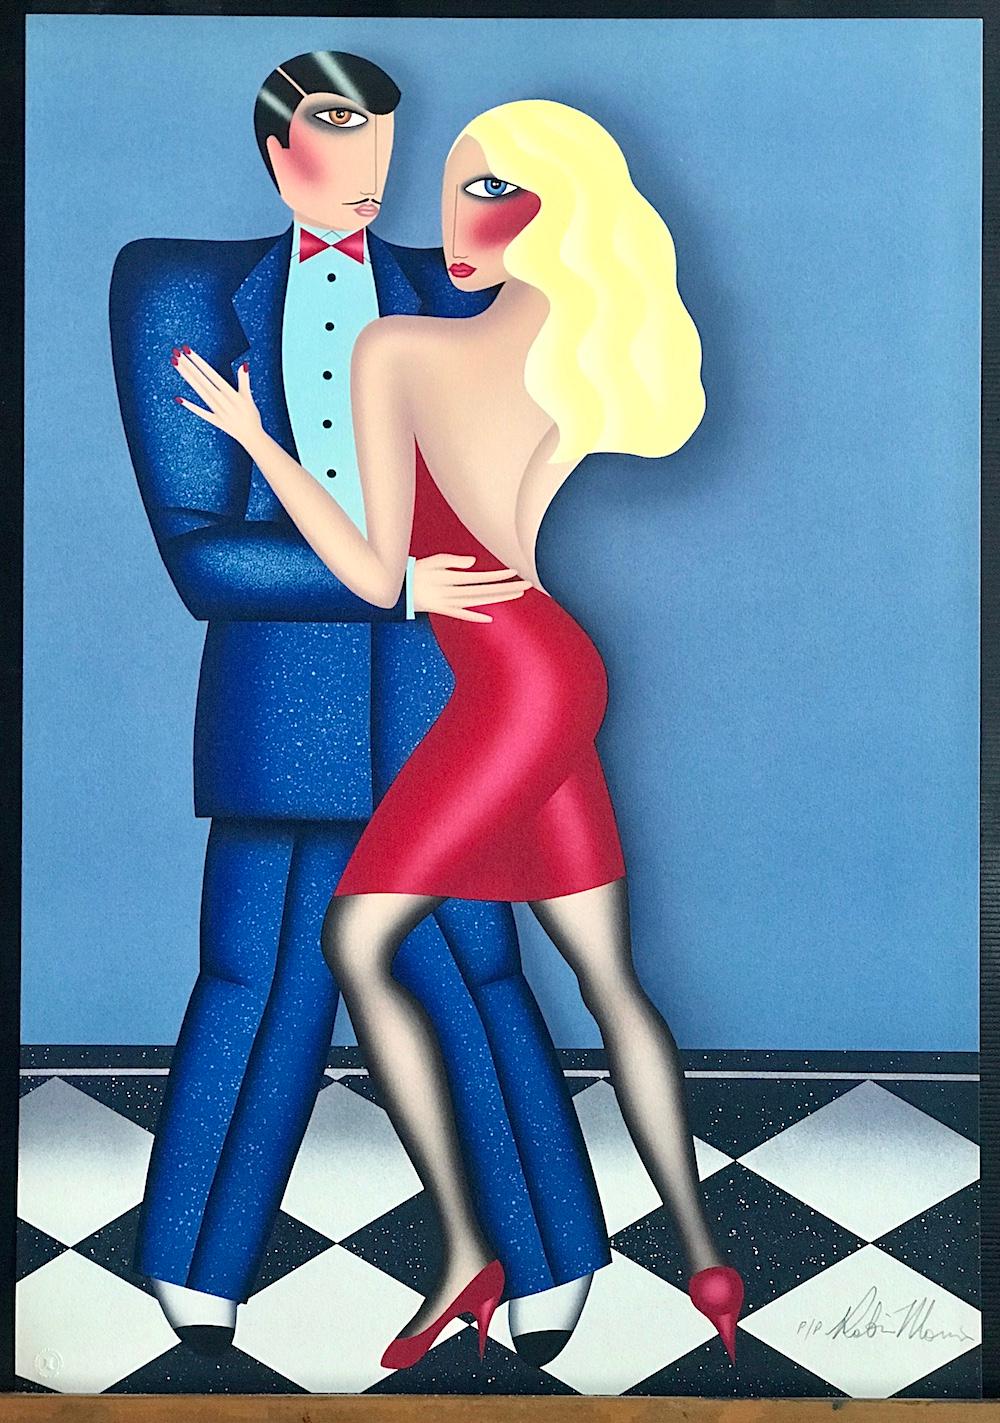 THE DANCE Signed Lithograph, Couple Dancing, Long Wavy Blonde Hair, Red Dress - Blue Portrait Print by Robin Morris